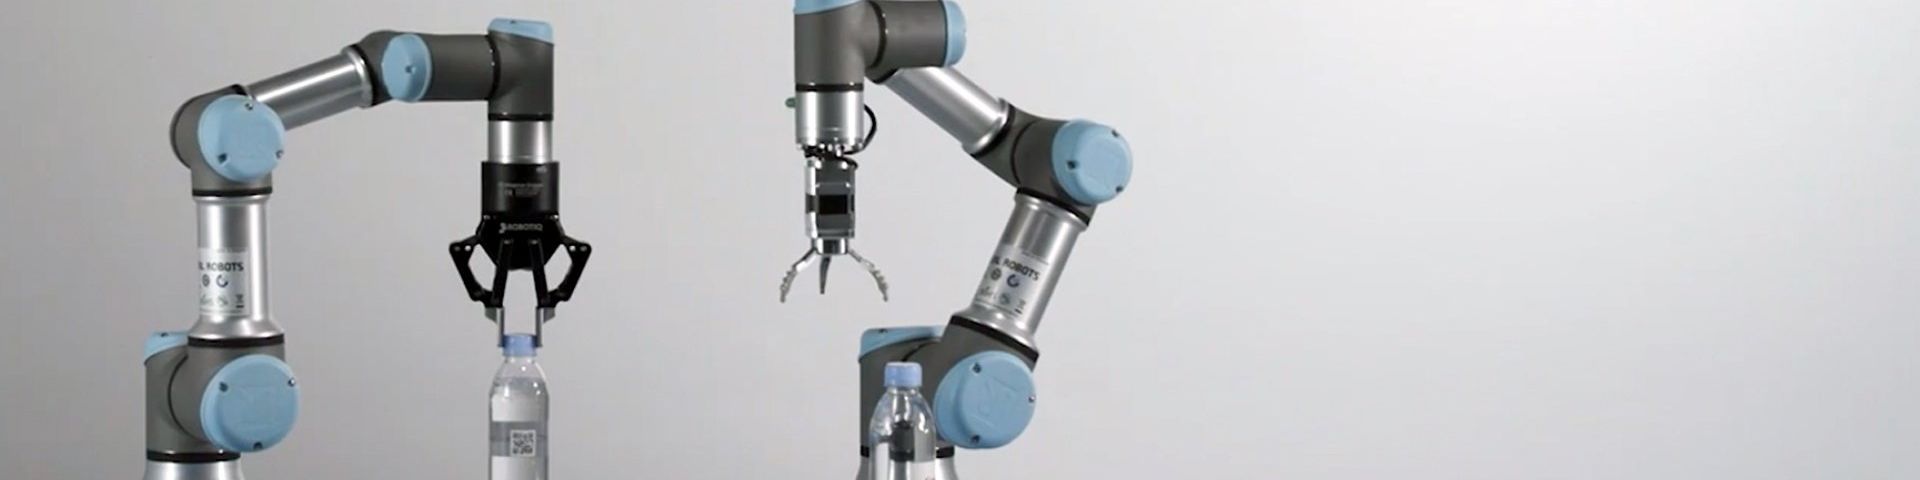 A Universal Robots cobot in action